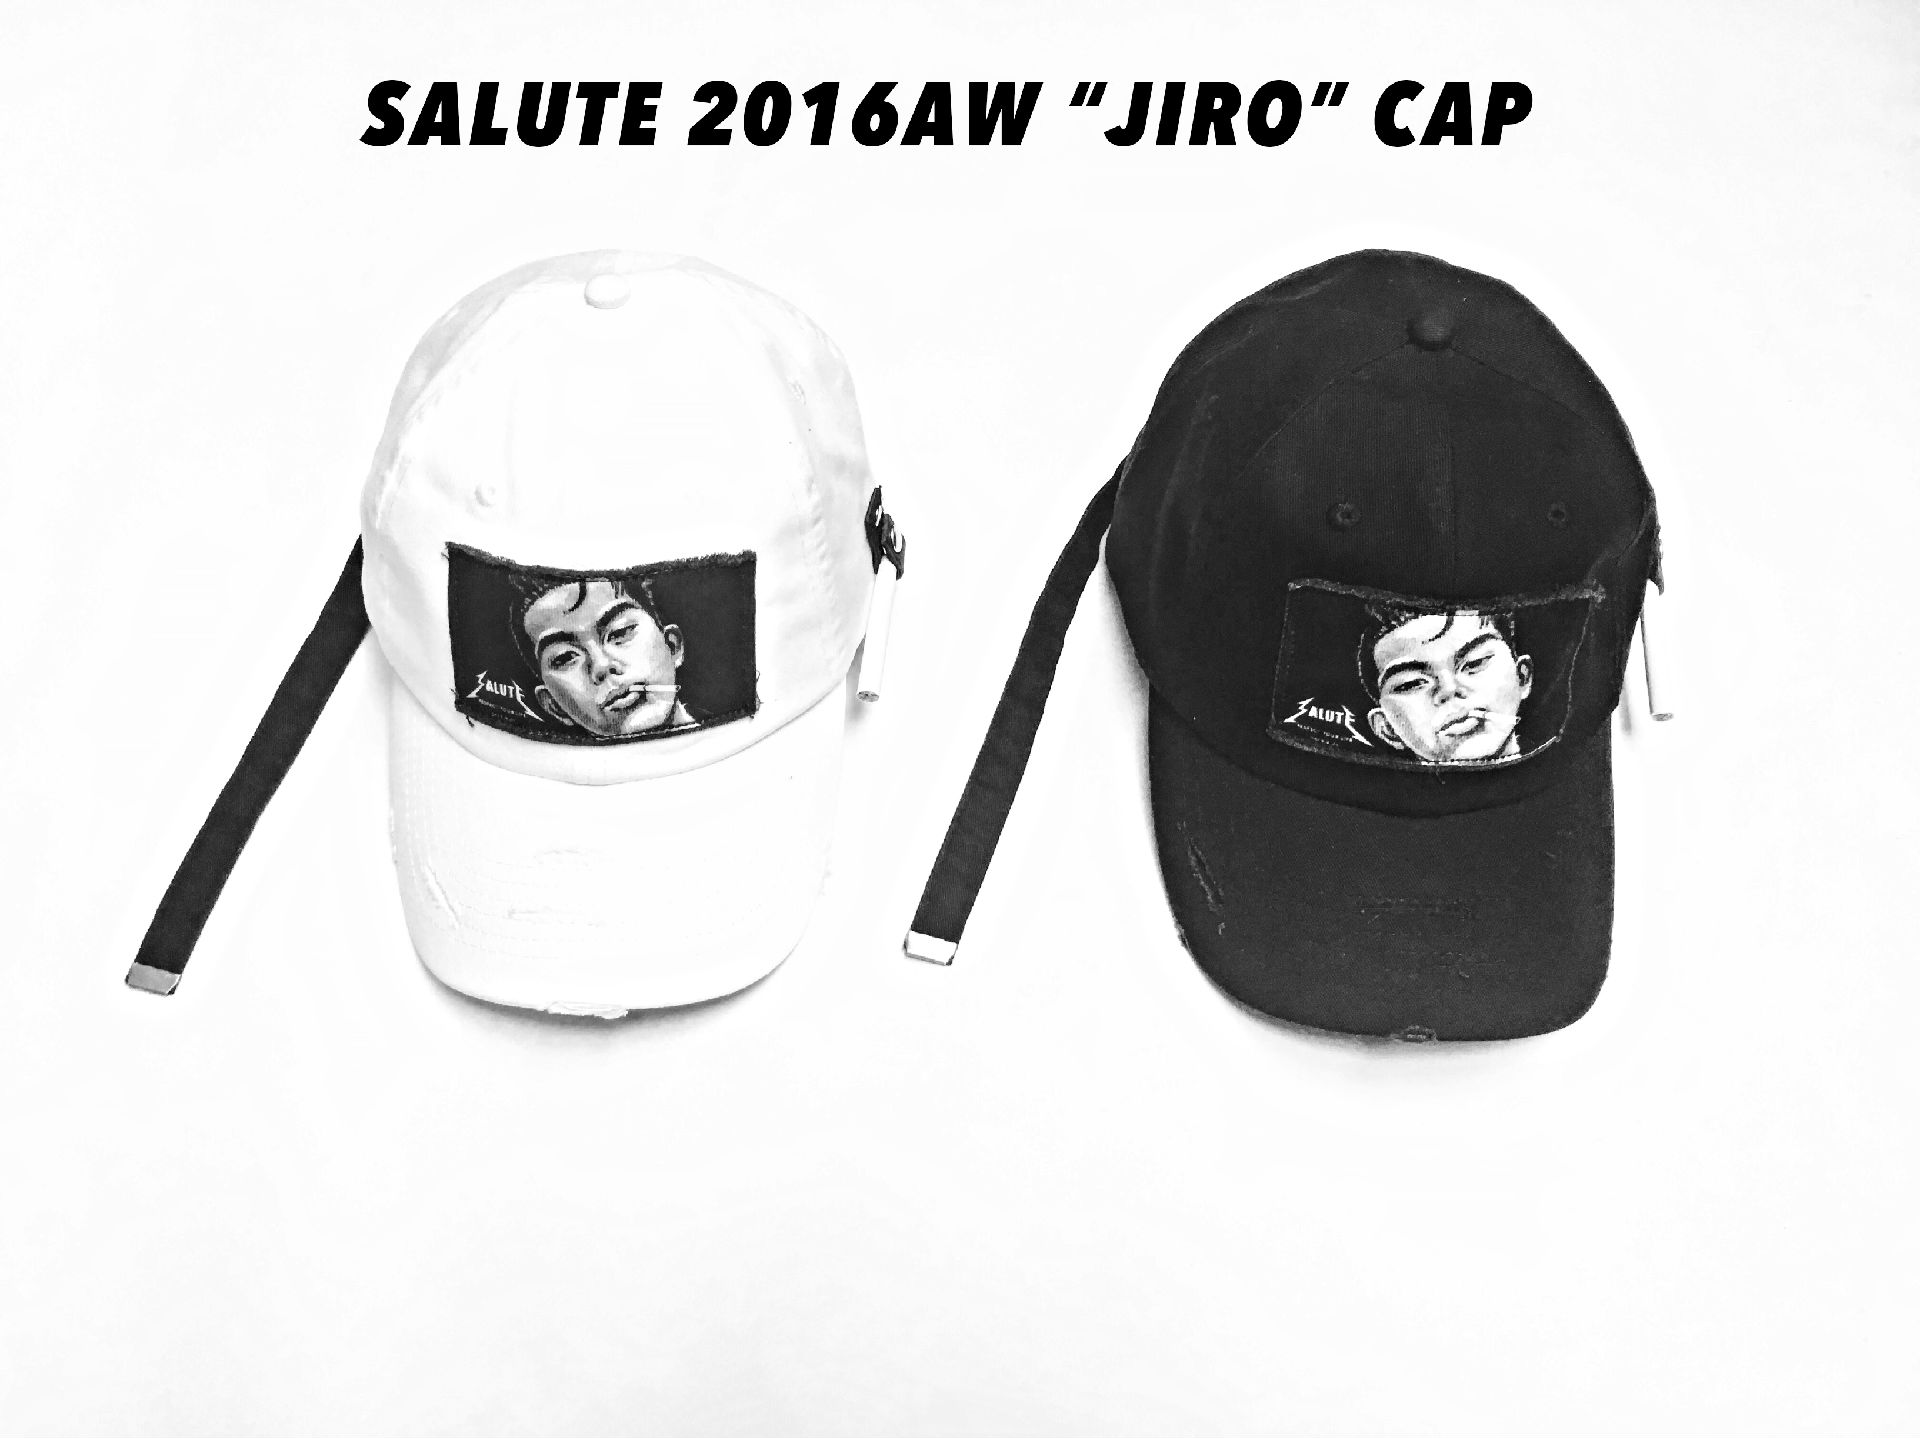 SALUTE 2016AW "JIRO" COLLECTION